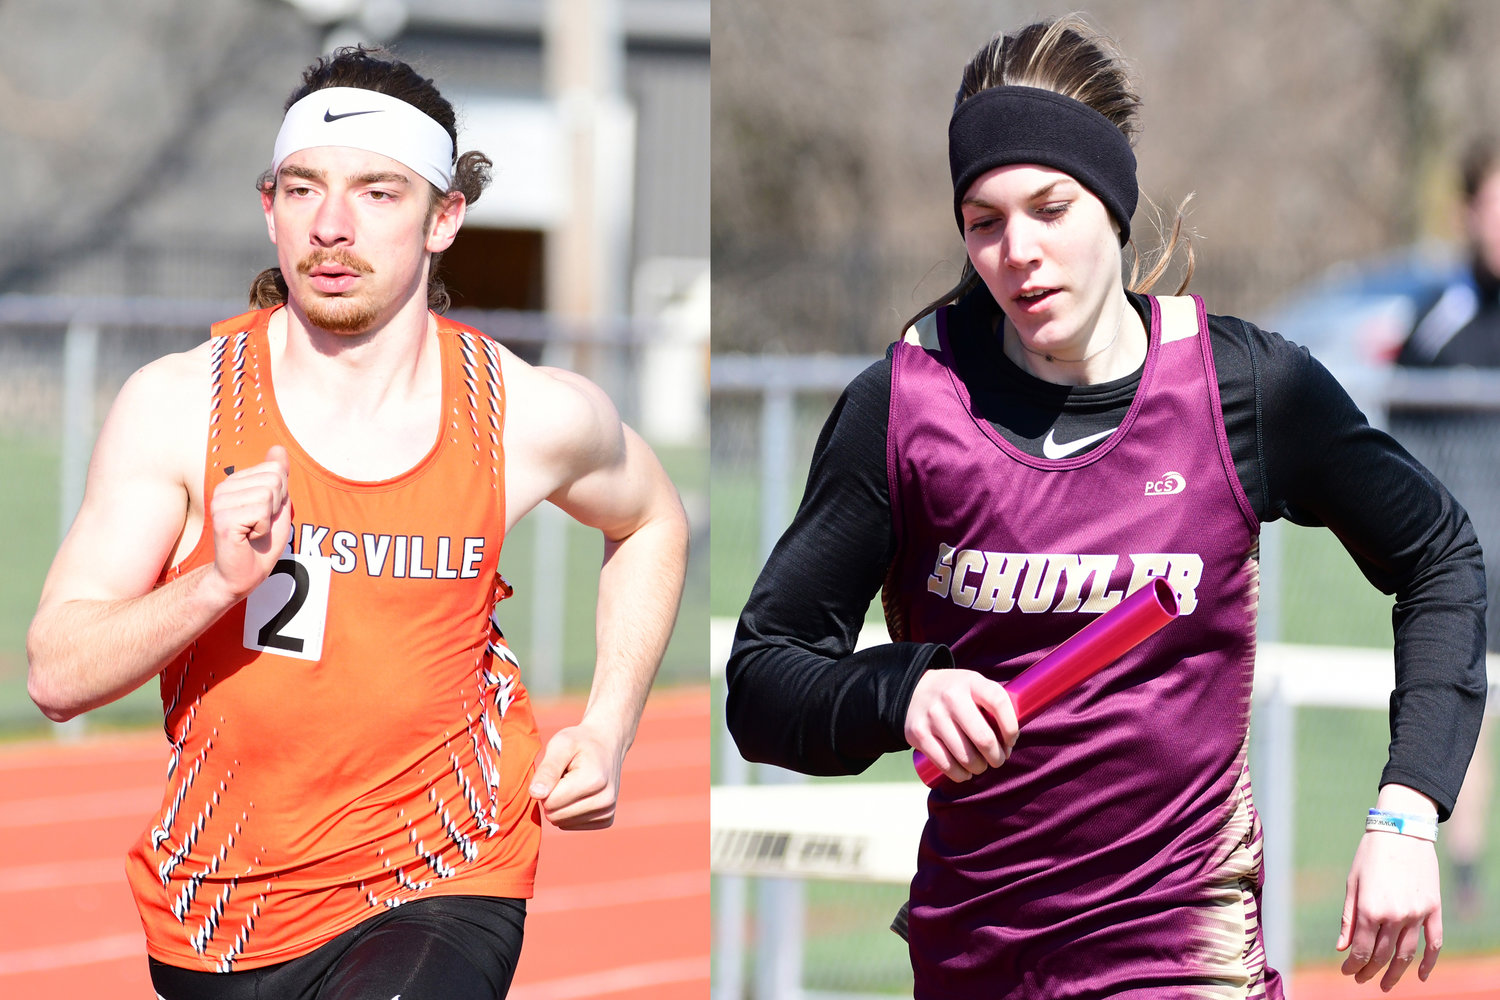 Side-by-side photos of Kirksville's Prophet Krepps and Schuyler County's Jacie Morris.